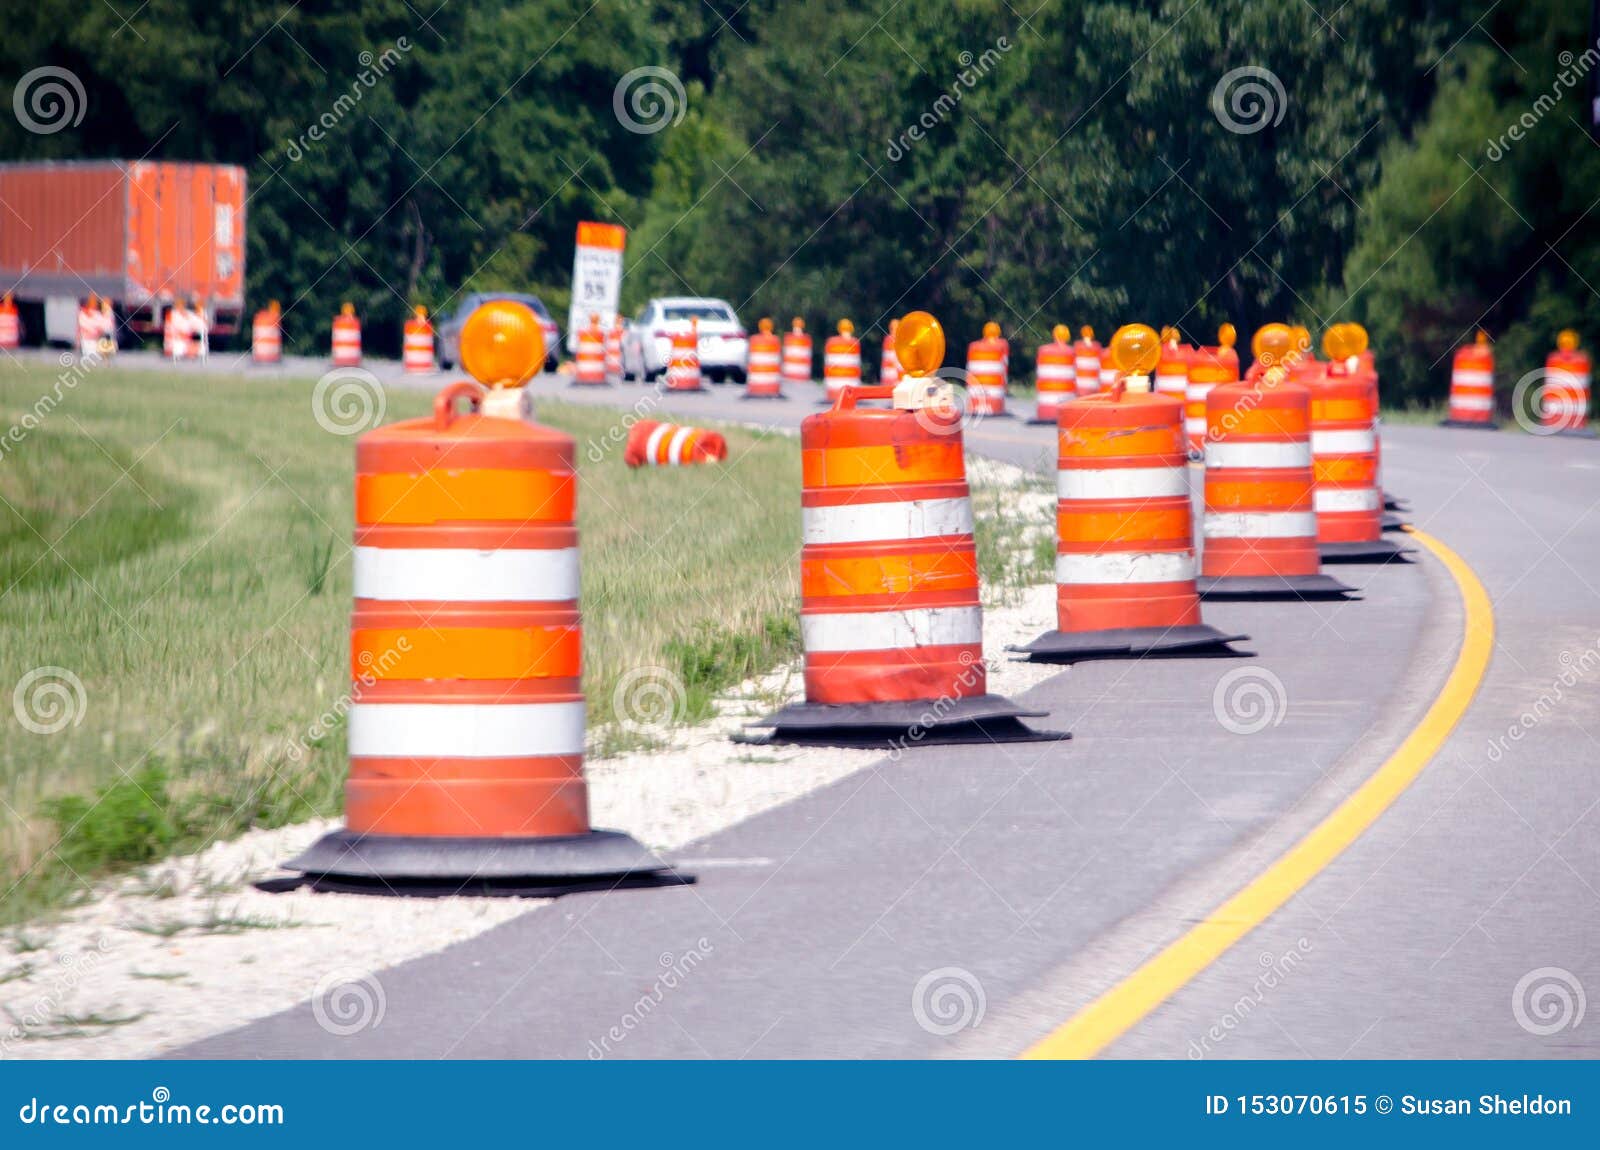 driving in a construction zone